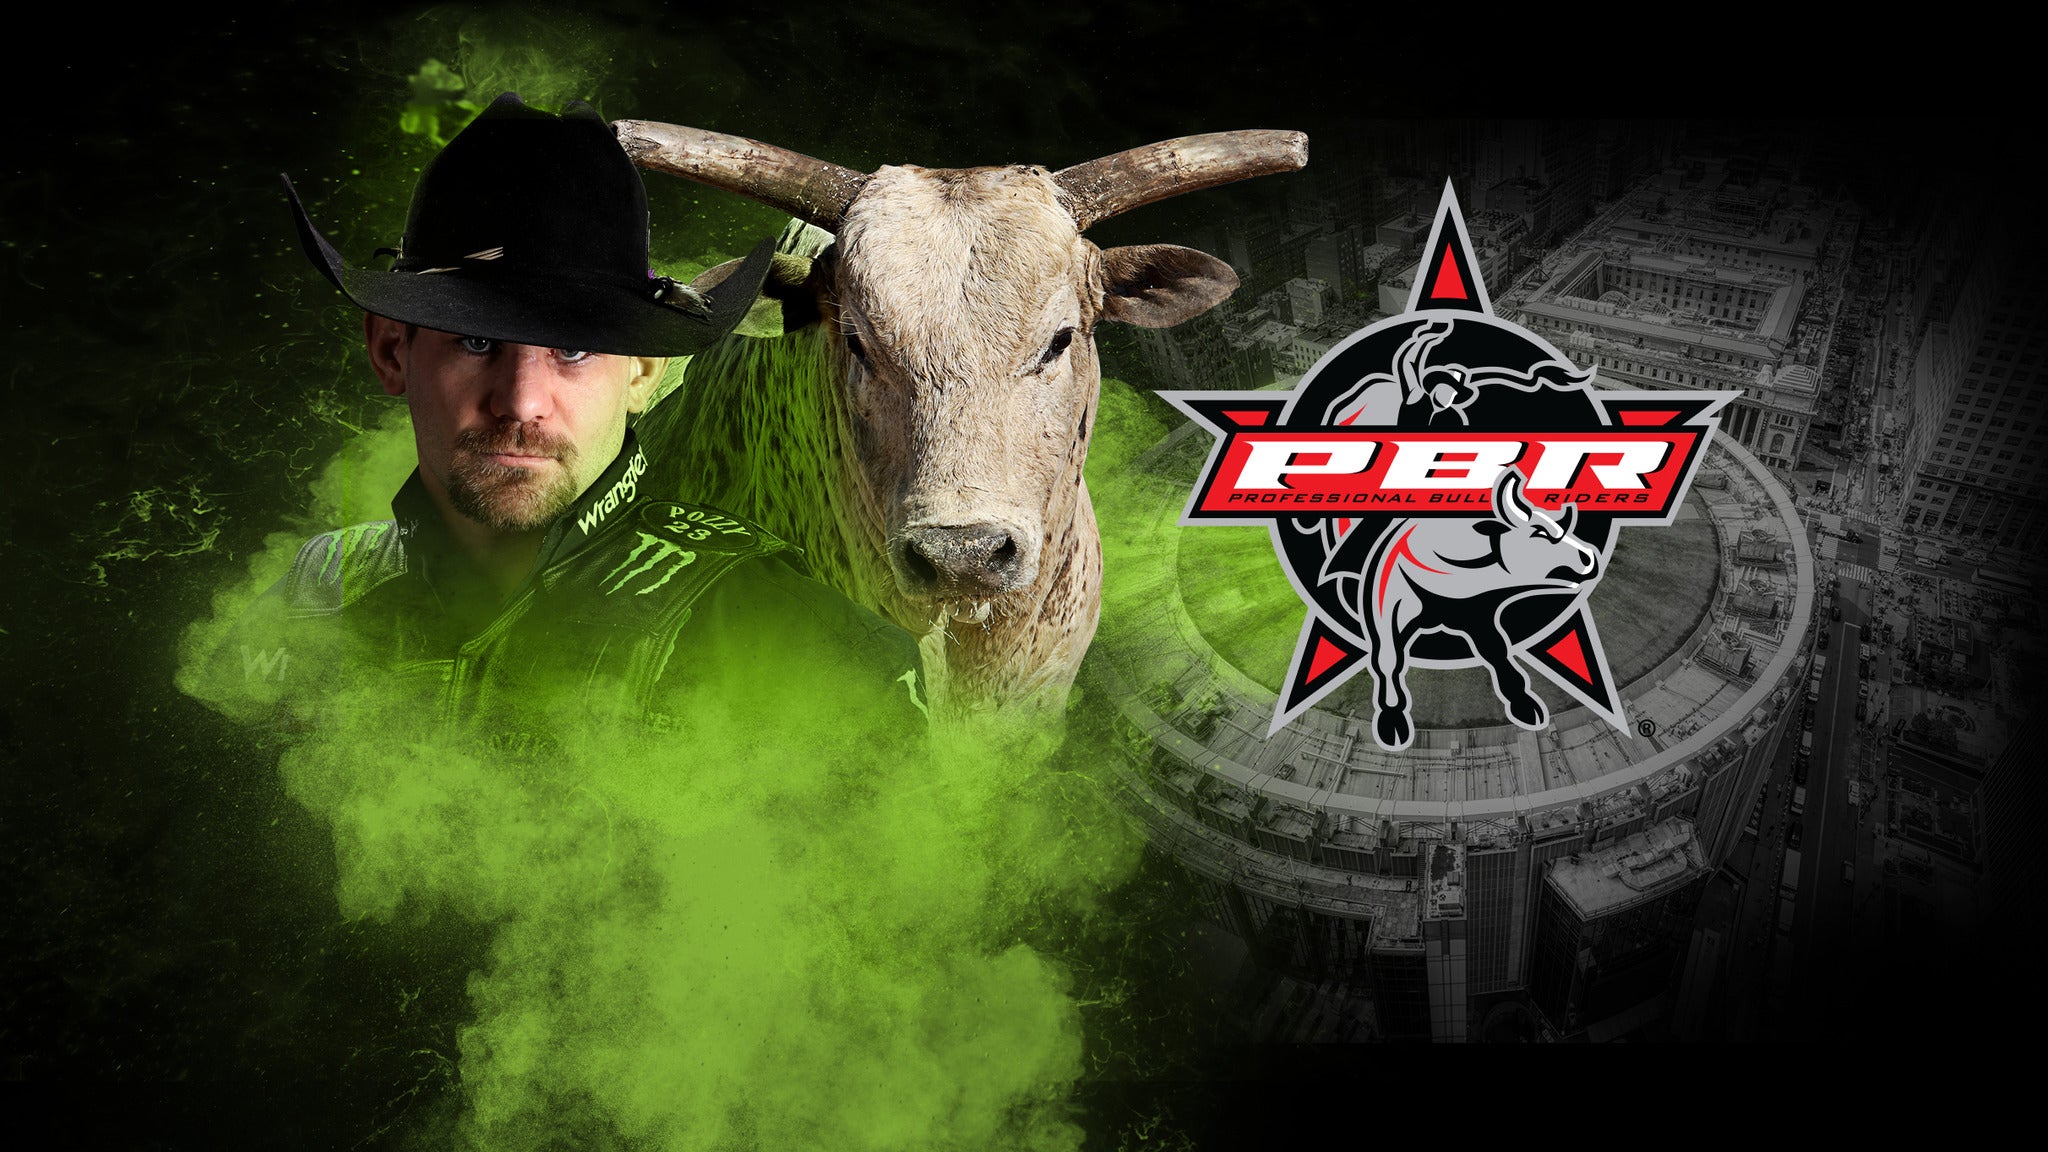 PBR: Unleash the Beast presale passcode for show tickets in Fort Worth, TX (Dickies Arena)